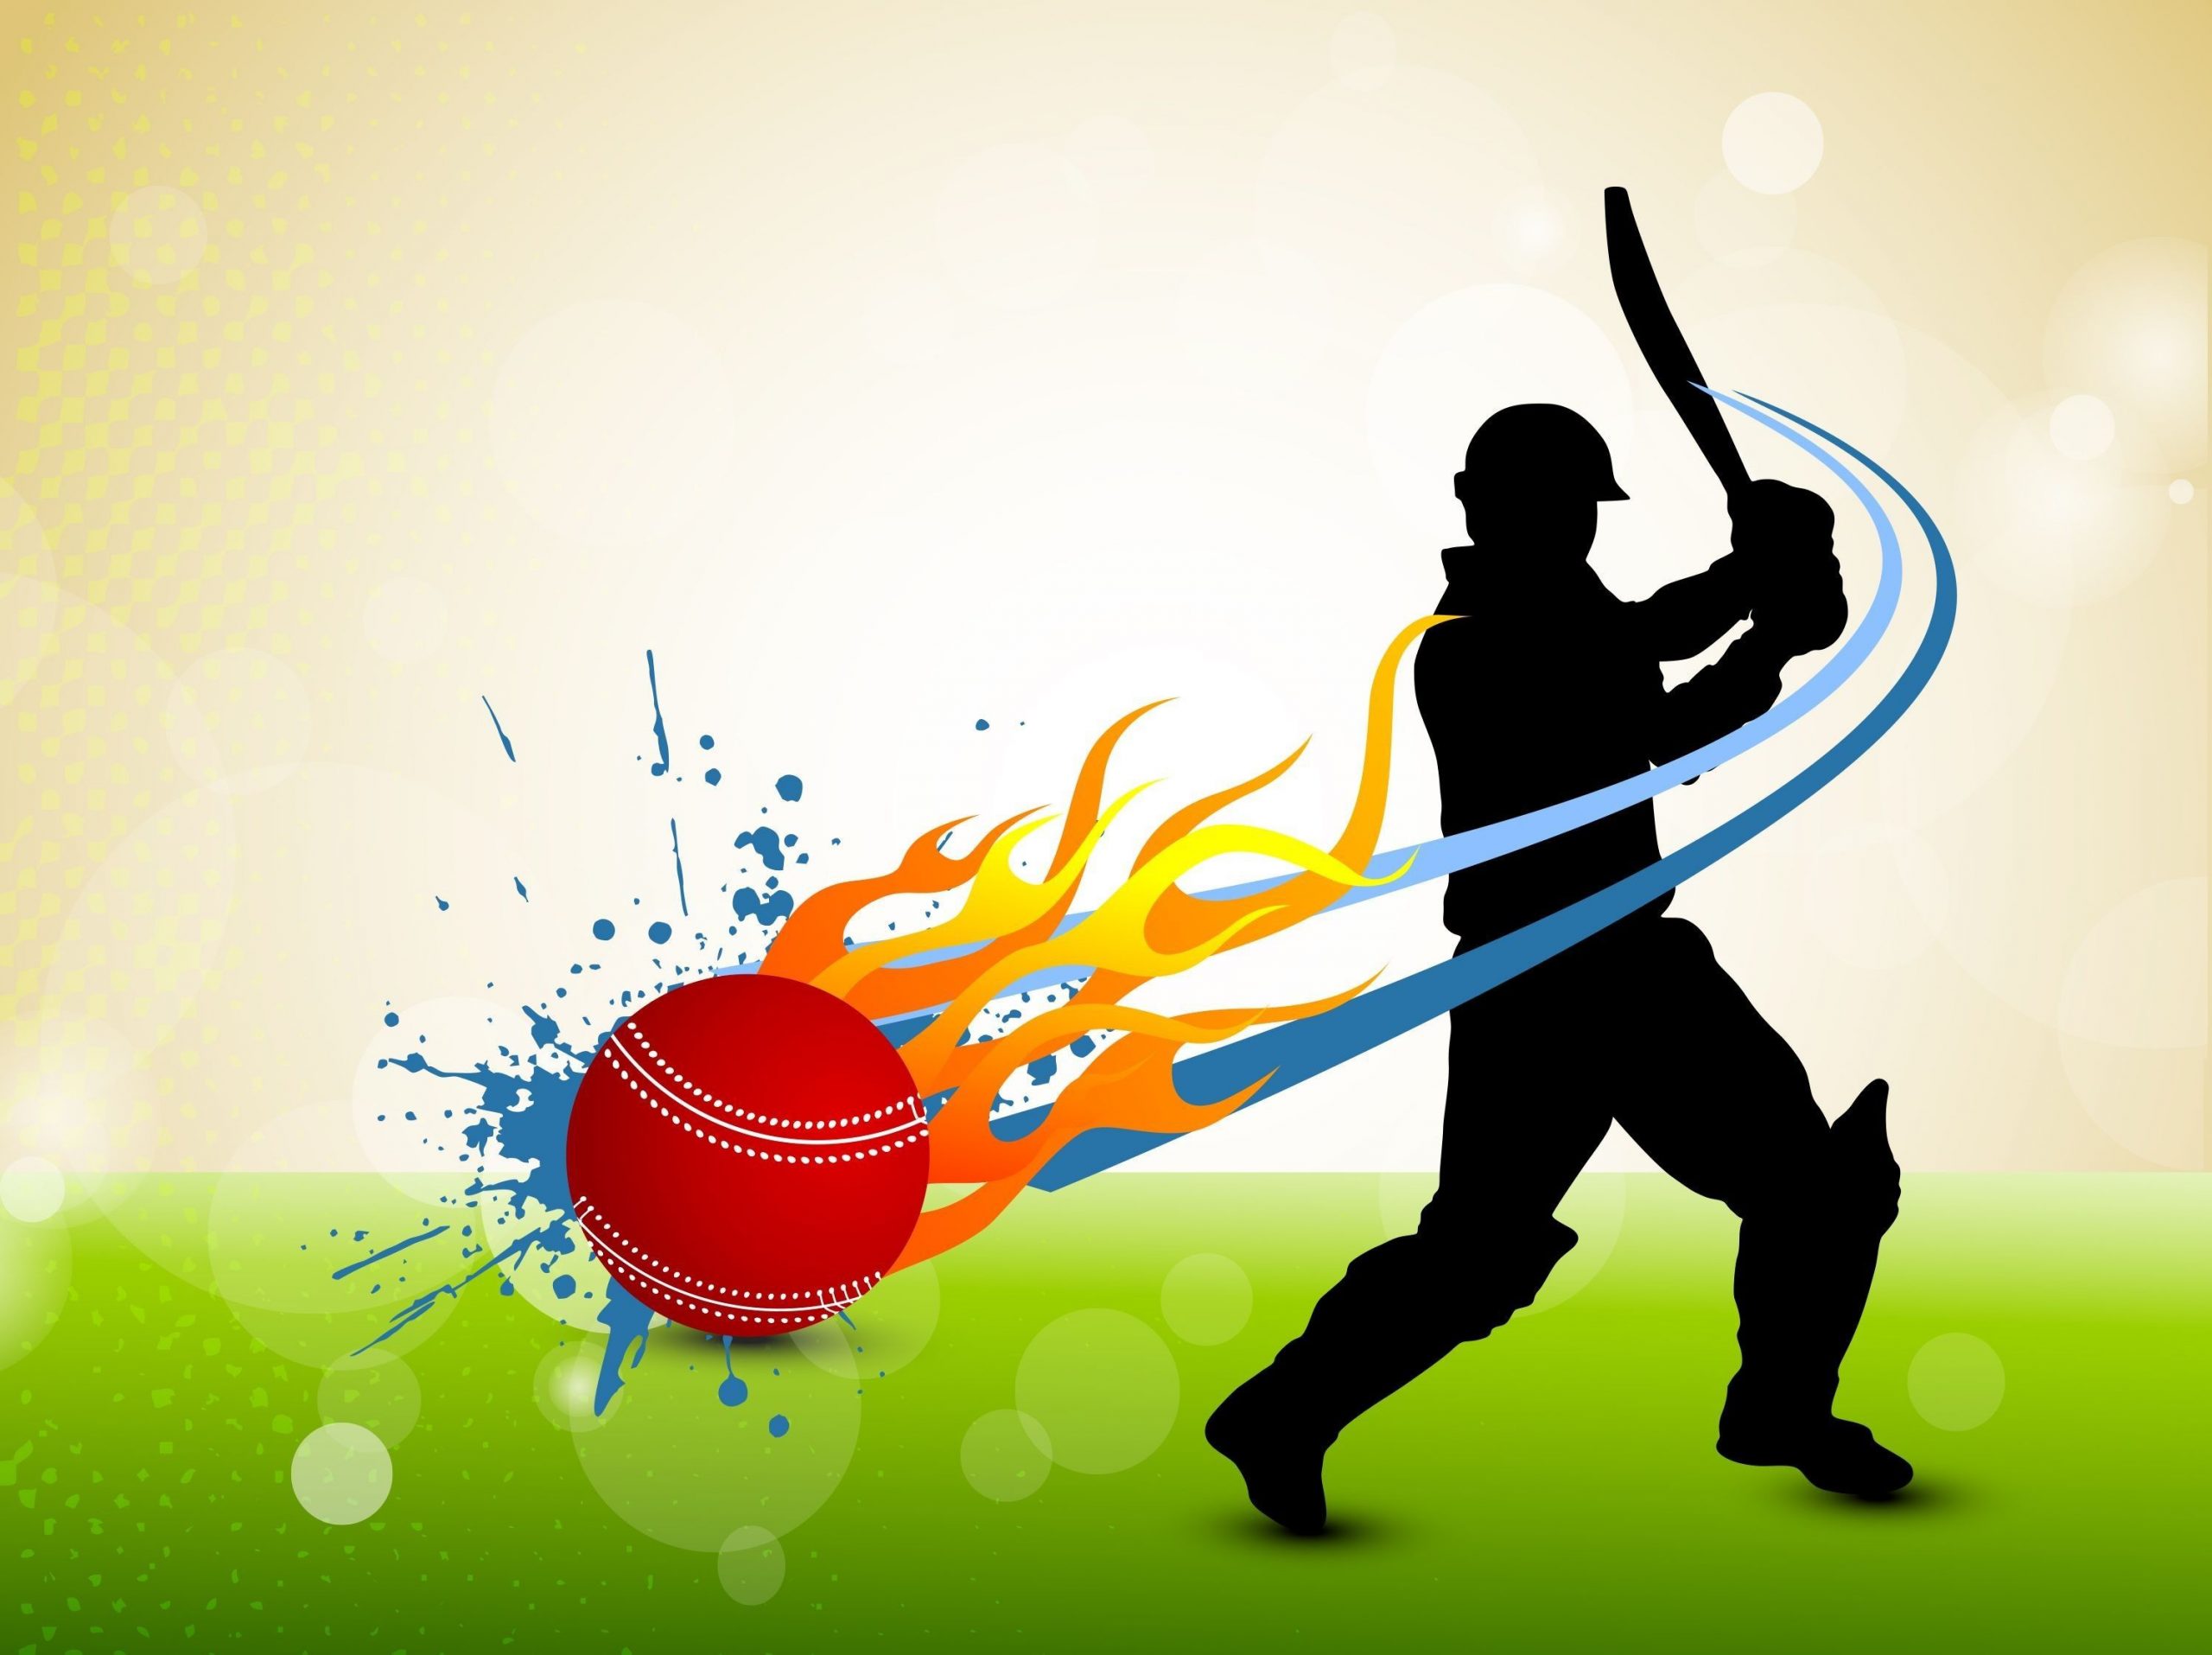 HD CRICKET WALLPAPER FOR FREE